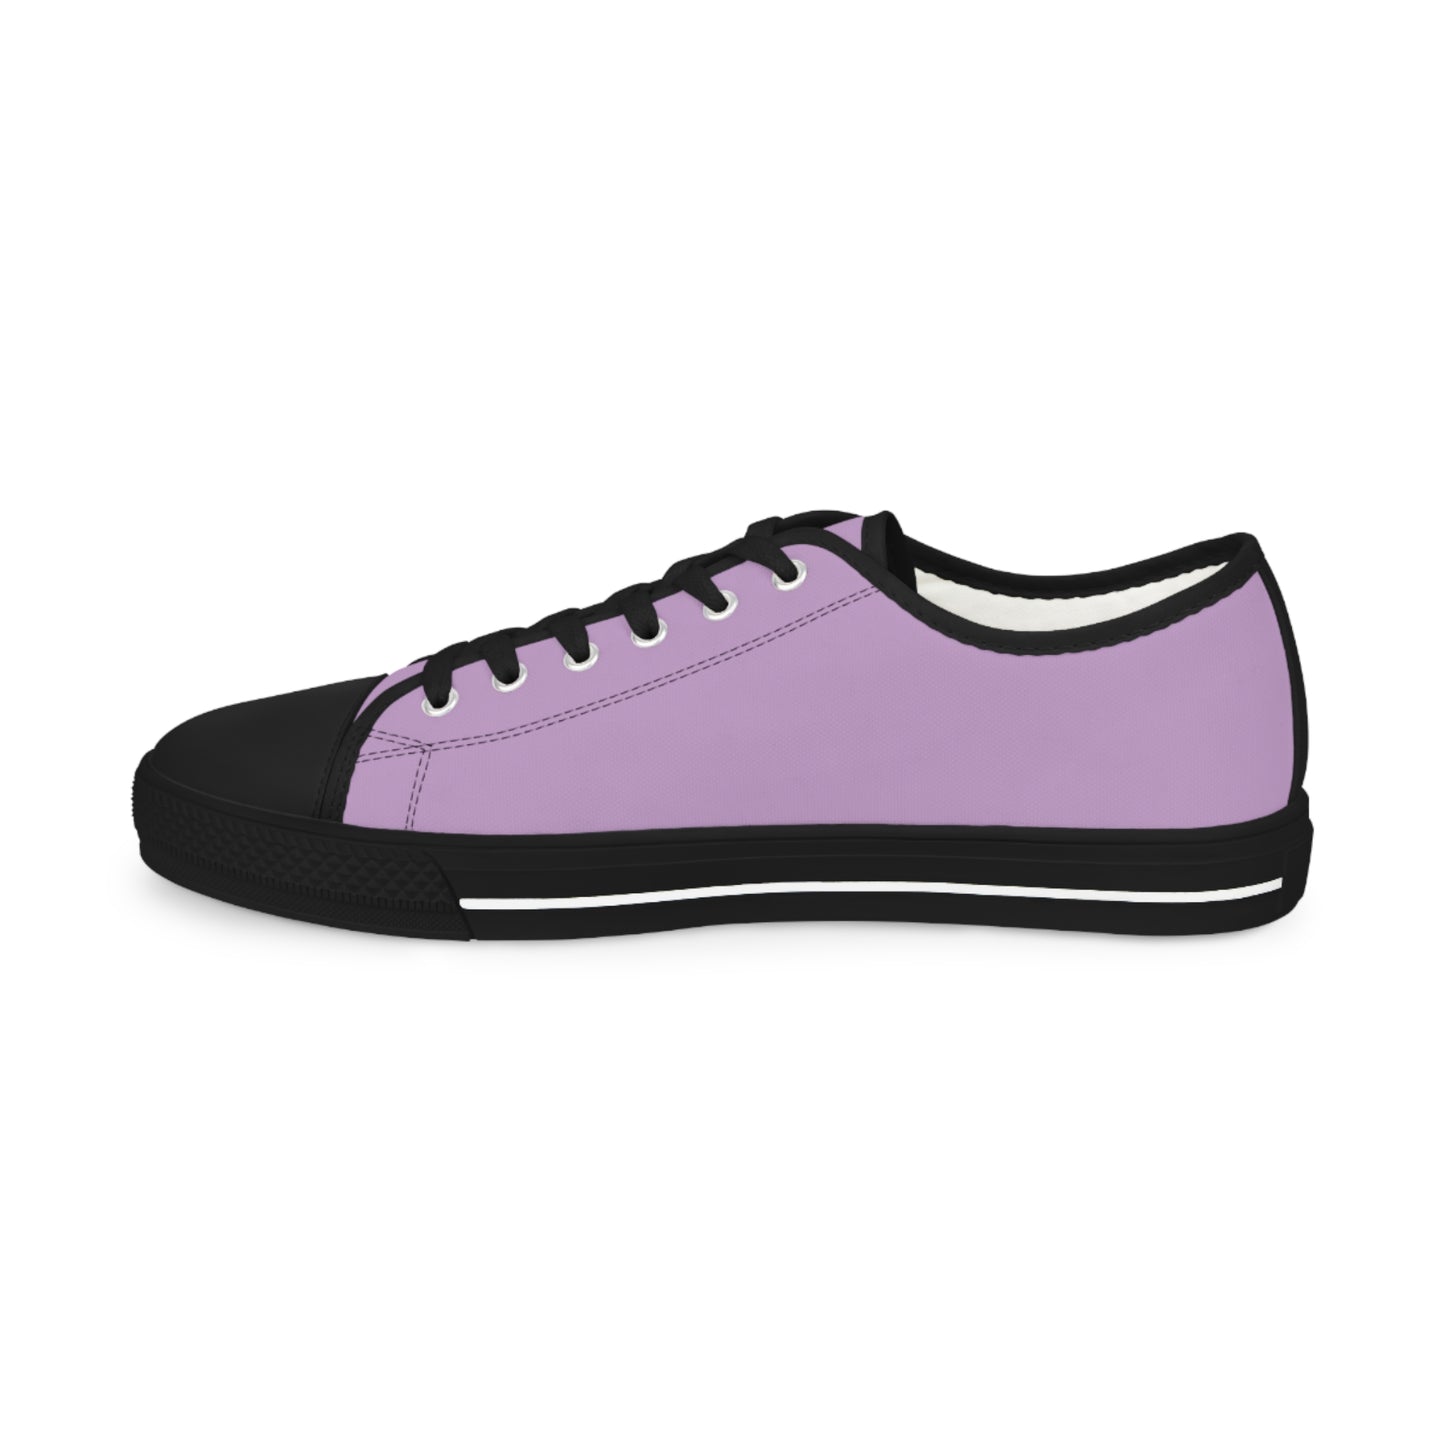 Men's Canvas Low Top Solid Color Sneakers - Pinky Purple US 14 Black sole